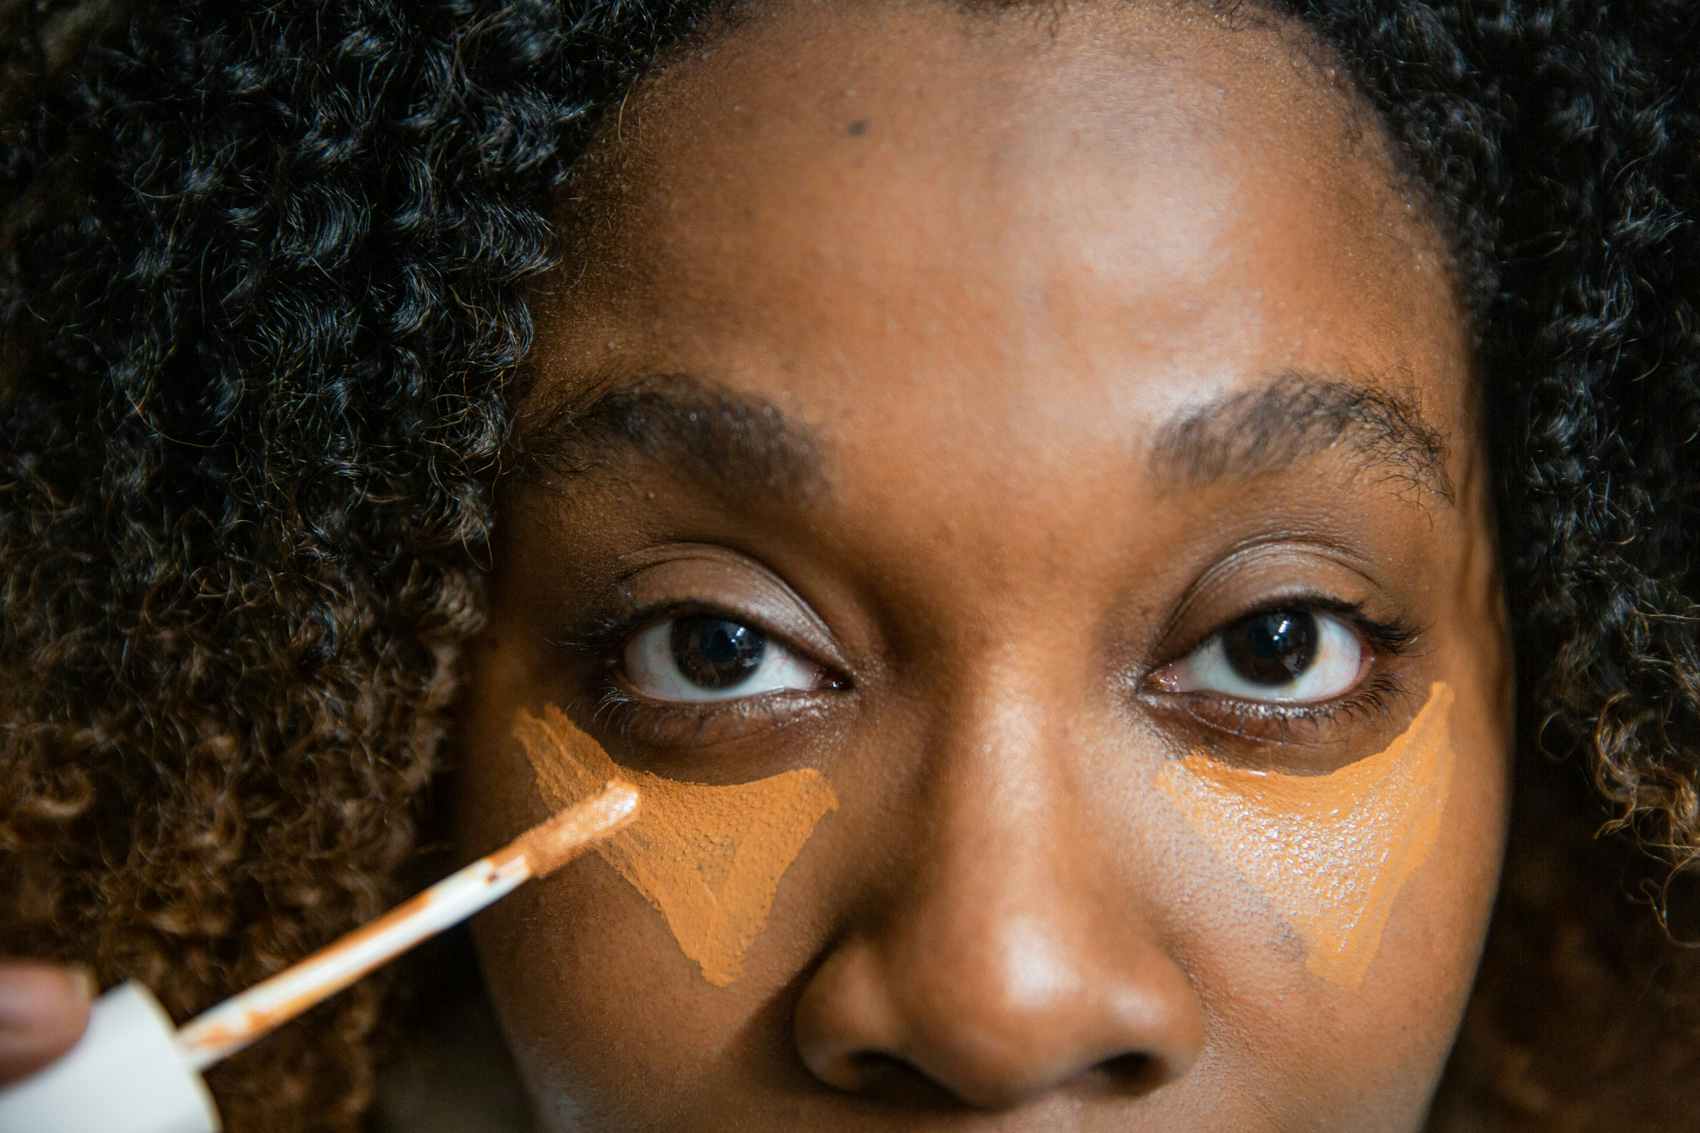 Putting concealer on in triangles help with dark circle under eyes